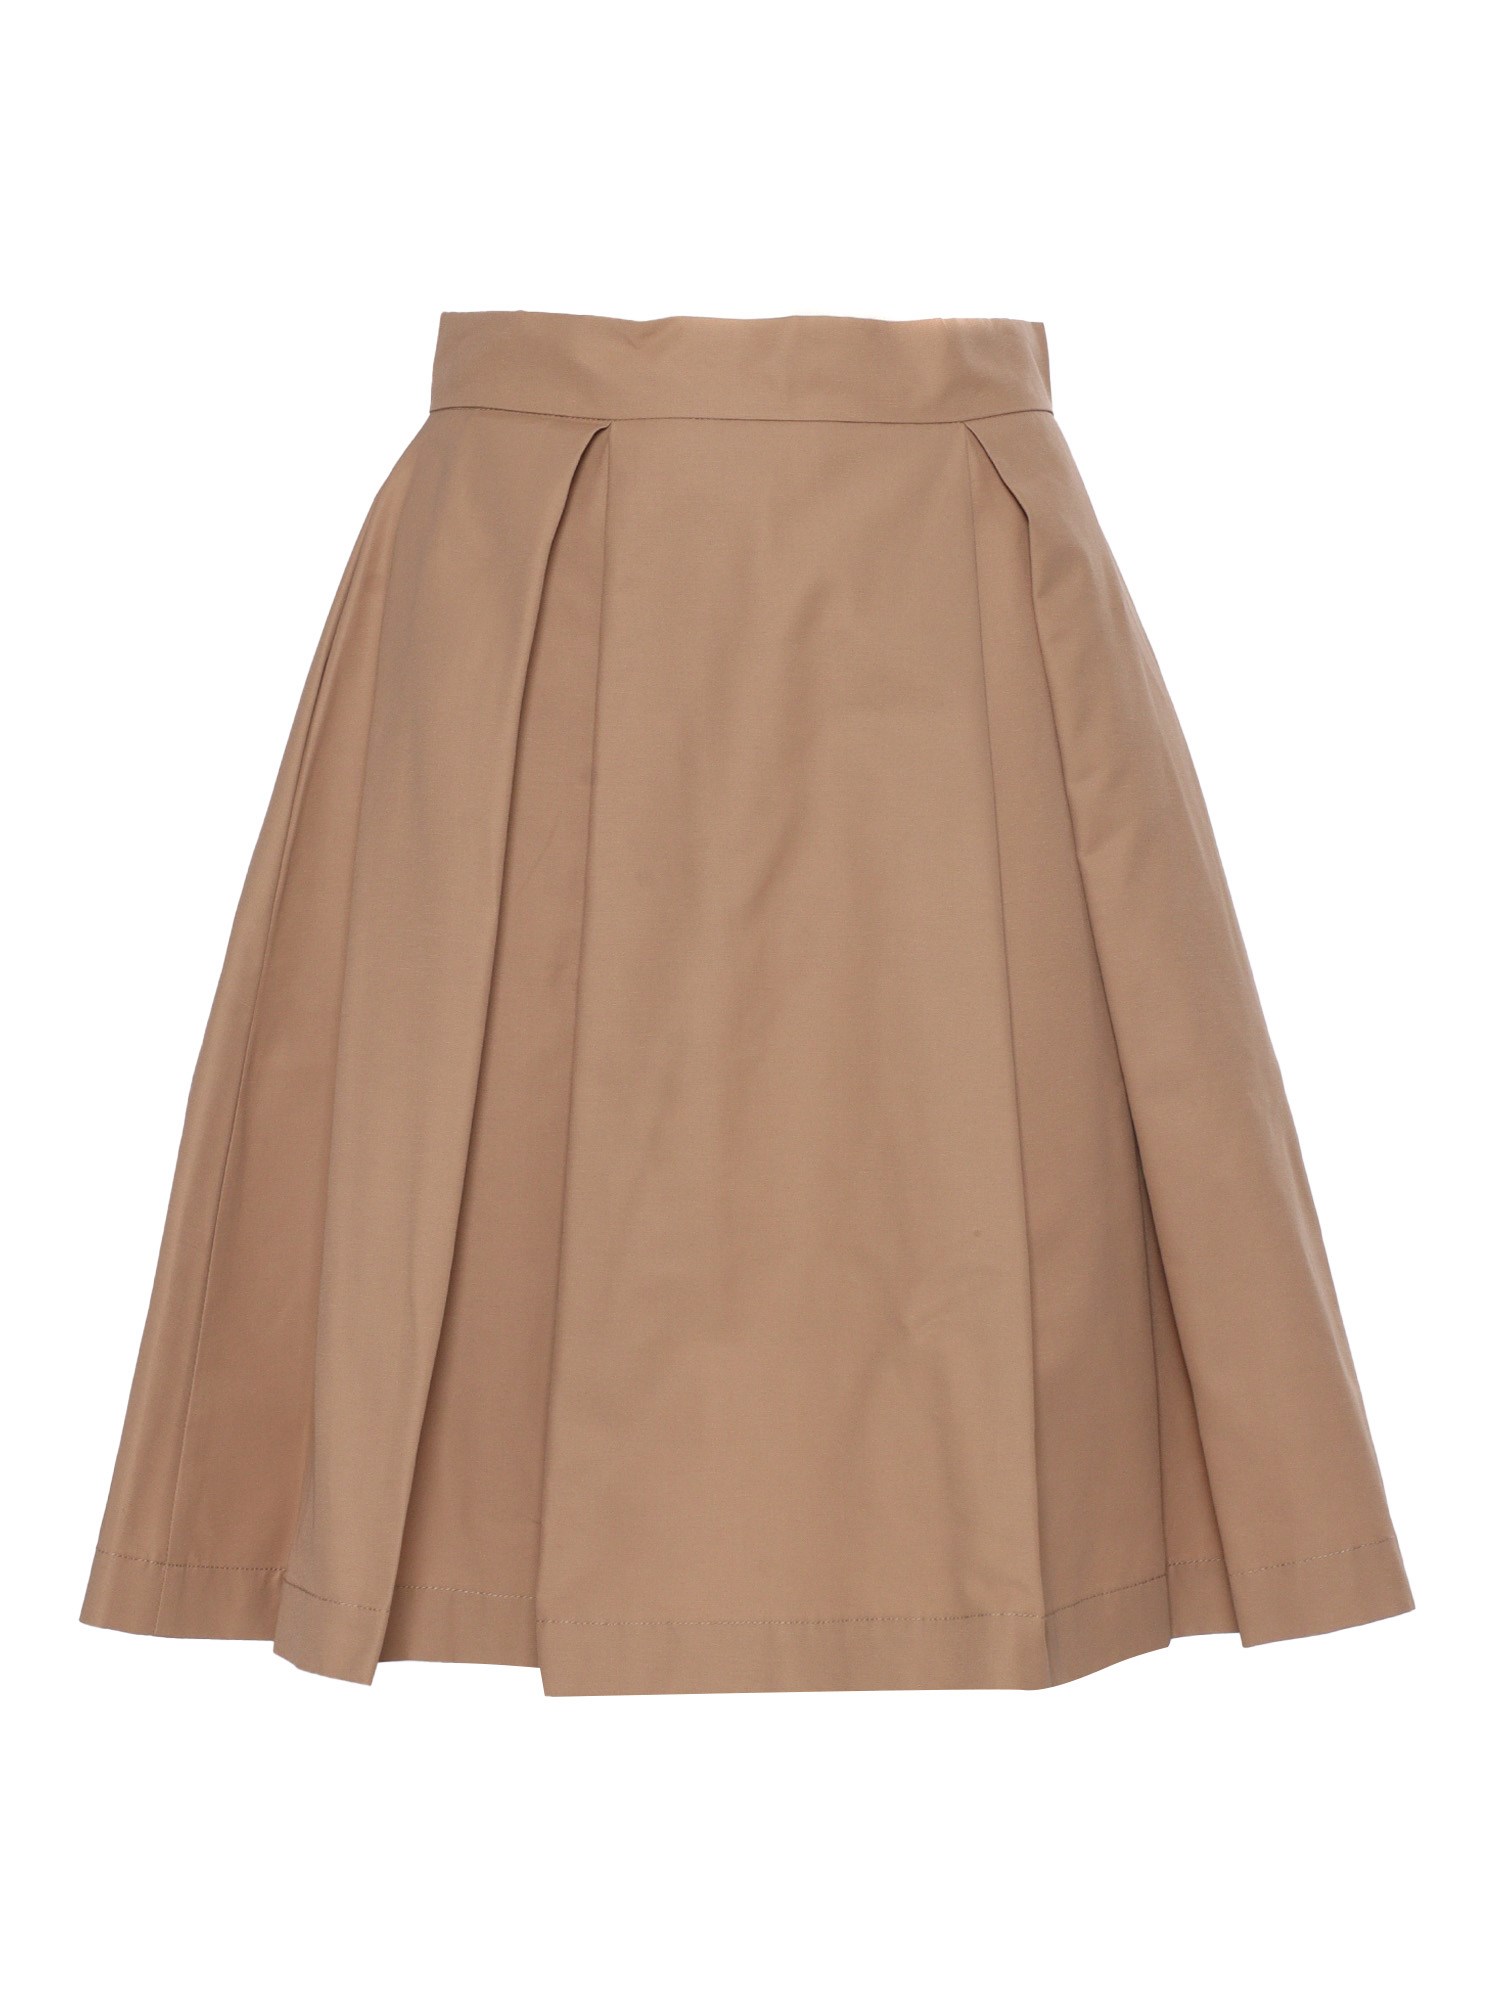 Max & Co Brown Flared Skirt